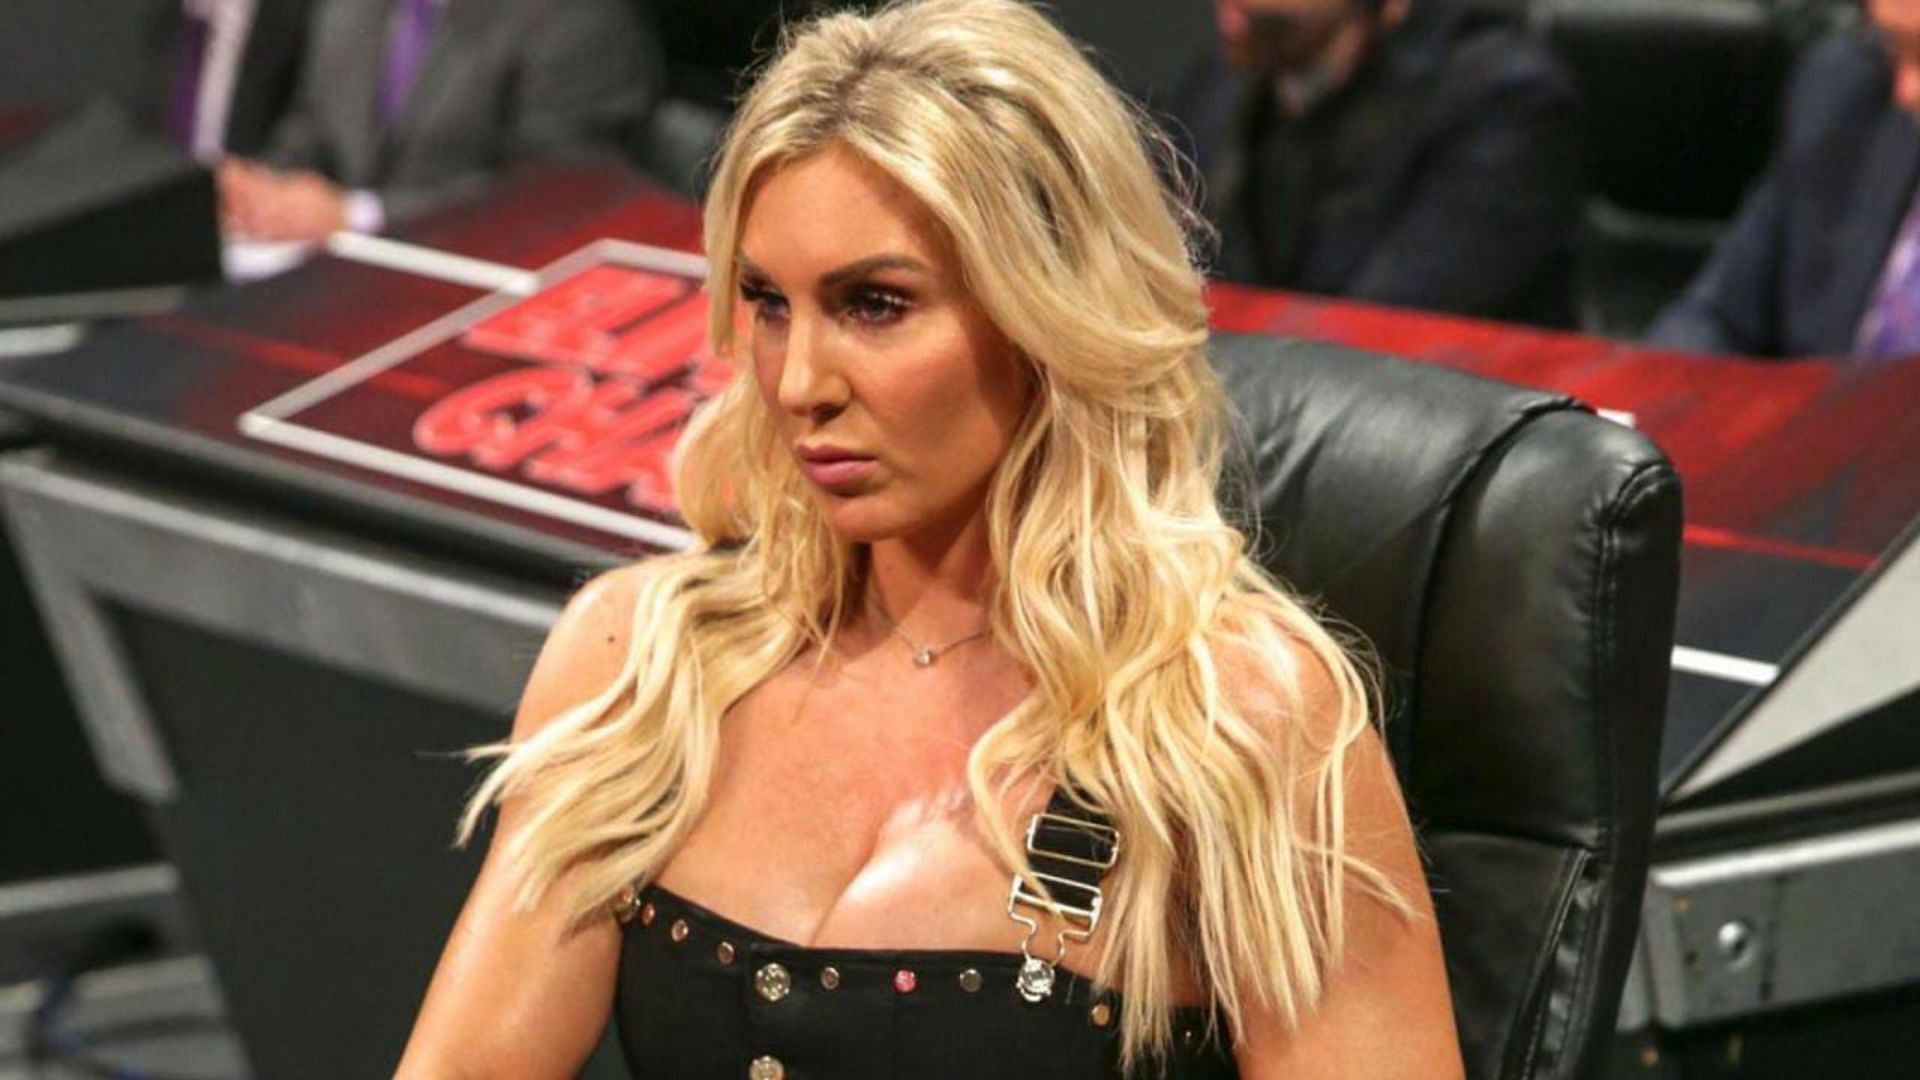 Charlotte Flair might not be returning to WWE by herself